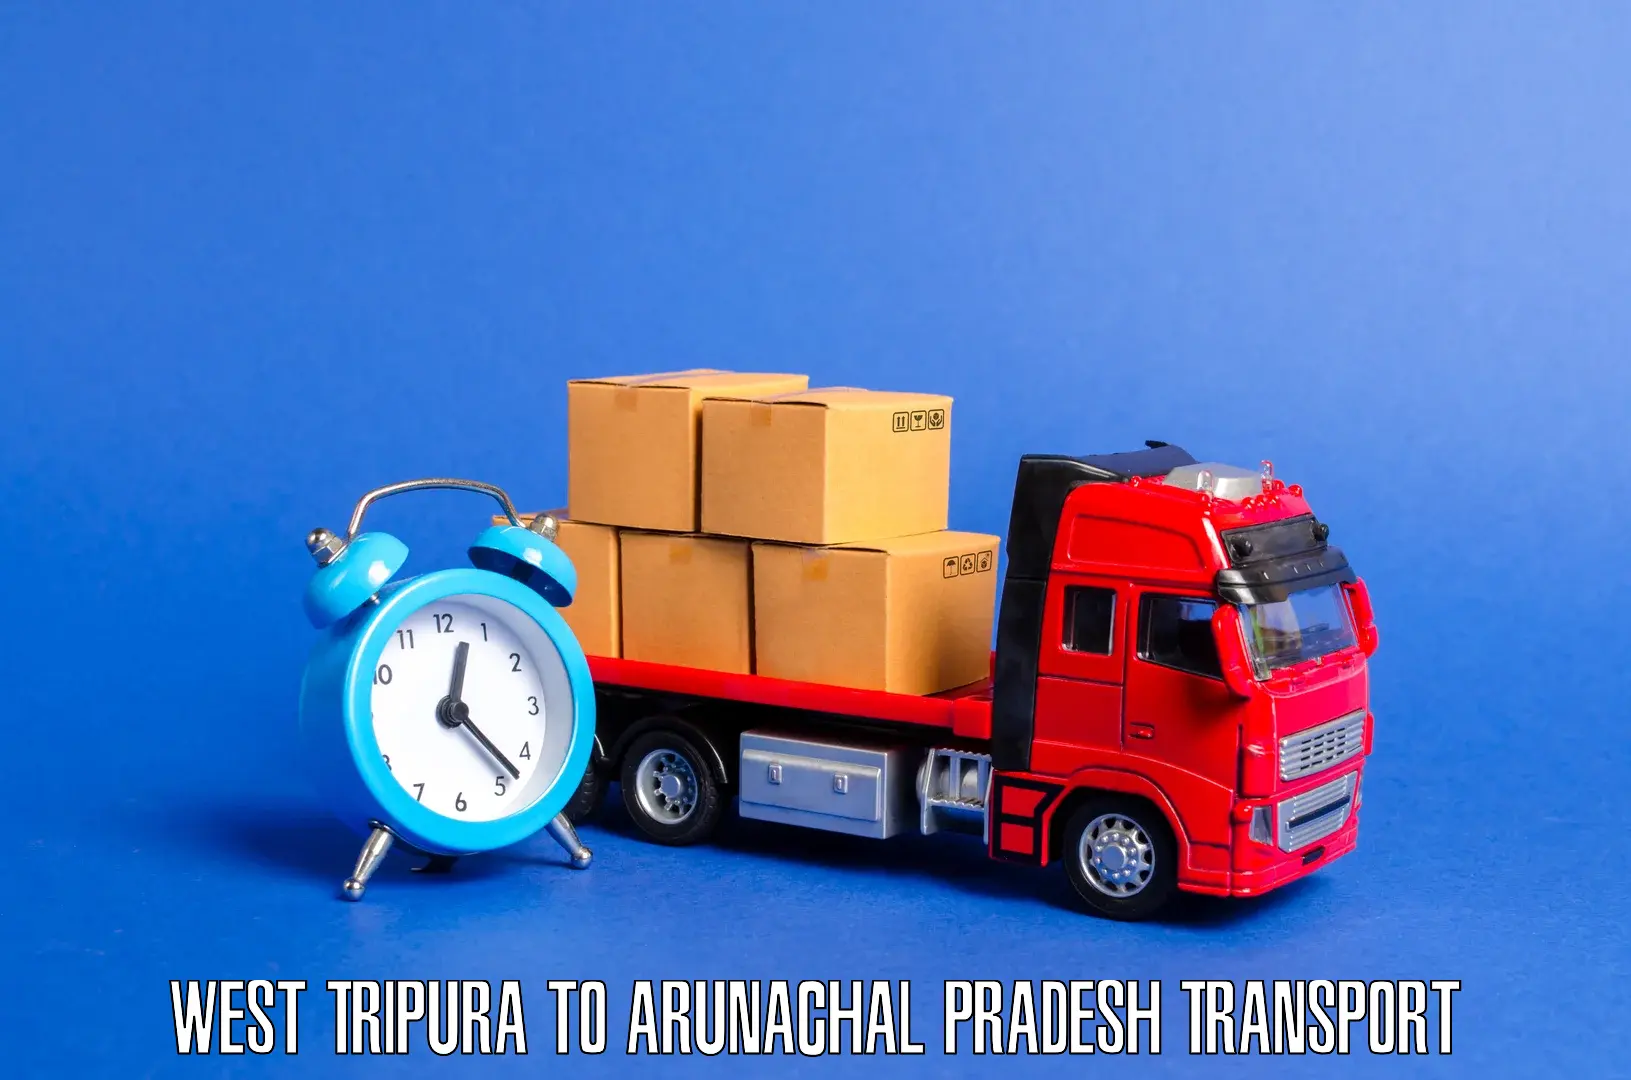 Furniture transport service in West Tripura to Changlang